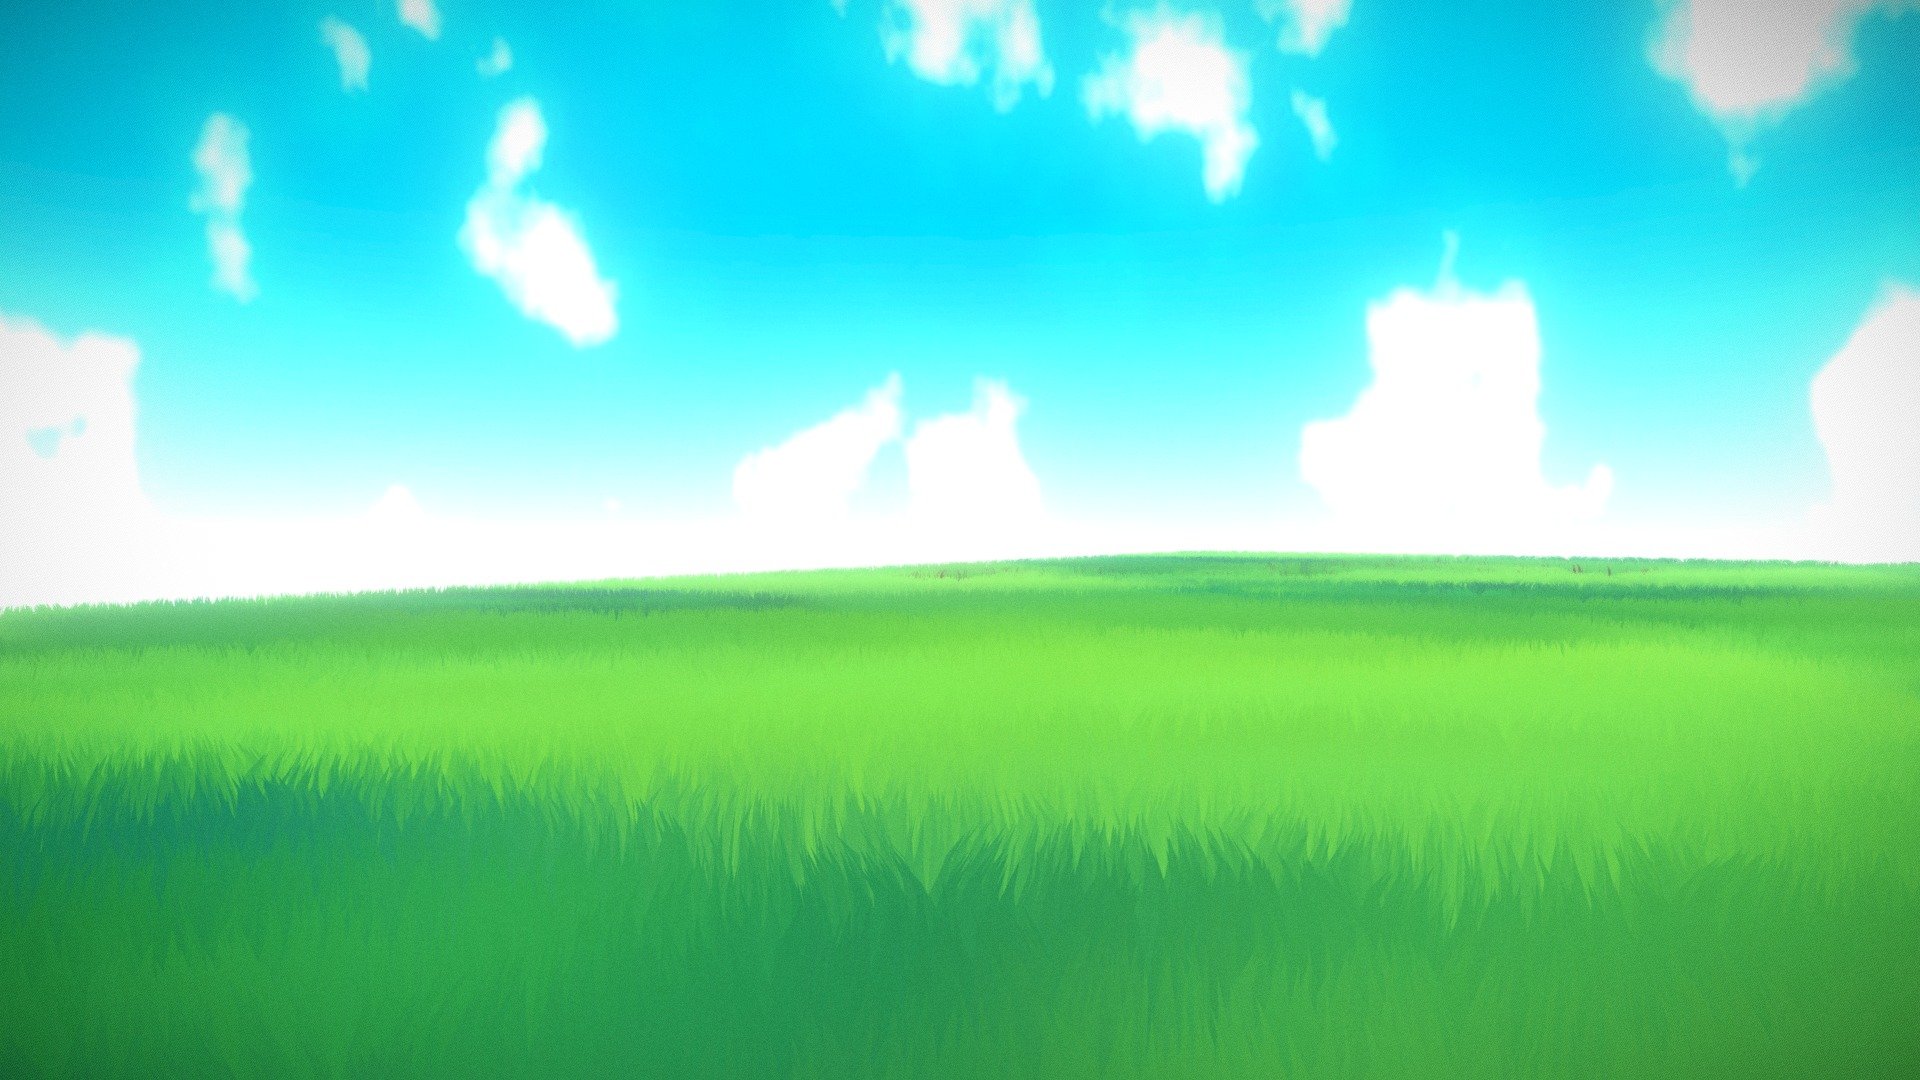 Download a painting of a field with grass and clouds Wallpaper   Wallpaperscom